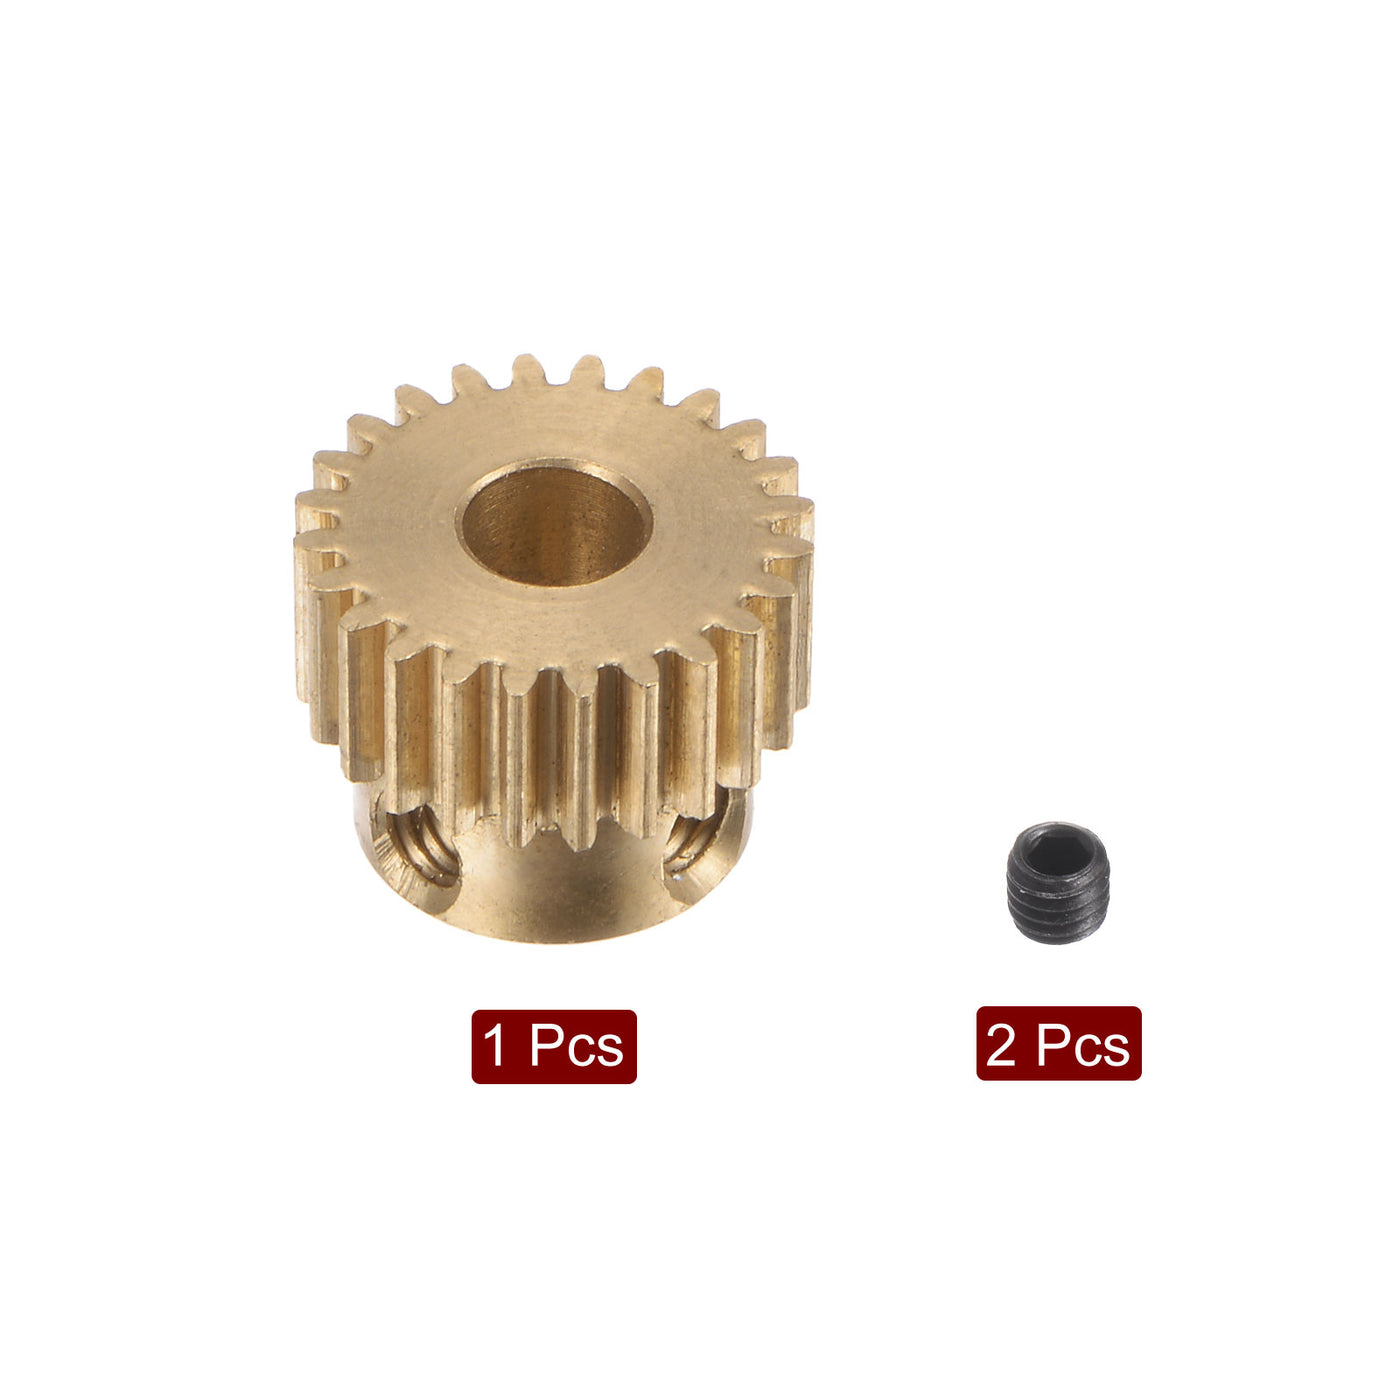 uxcell Uxcell 0.5 Mod 24T 4mm Bore 13mm Outer Dia Brass Motor Rack Pinion Gear with Screws